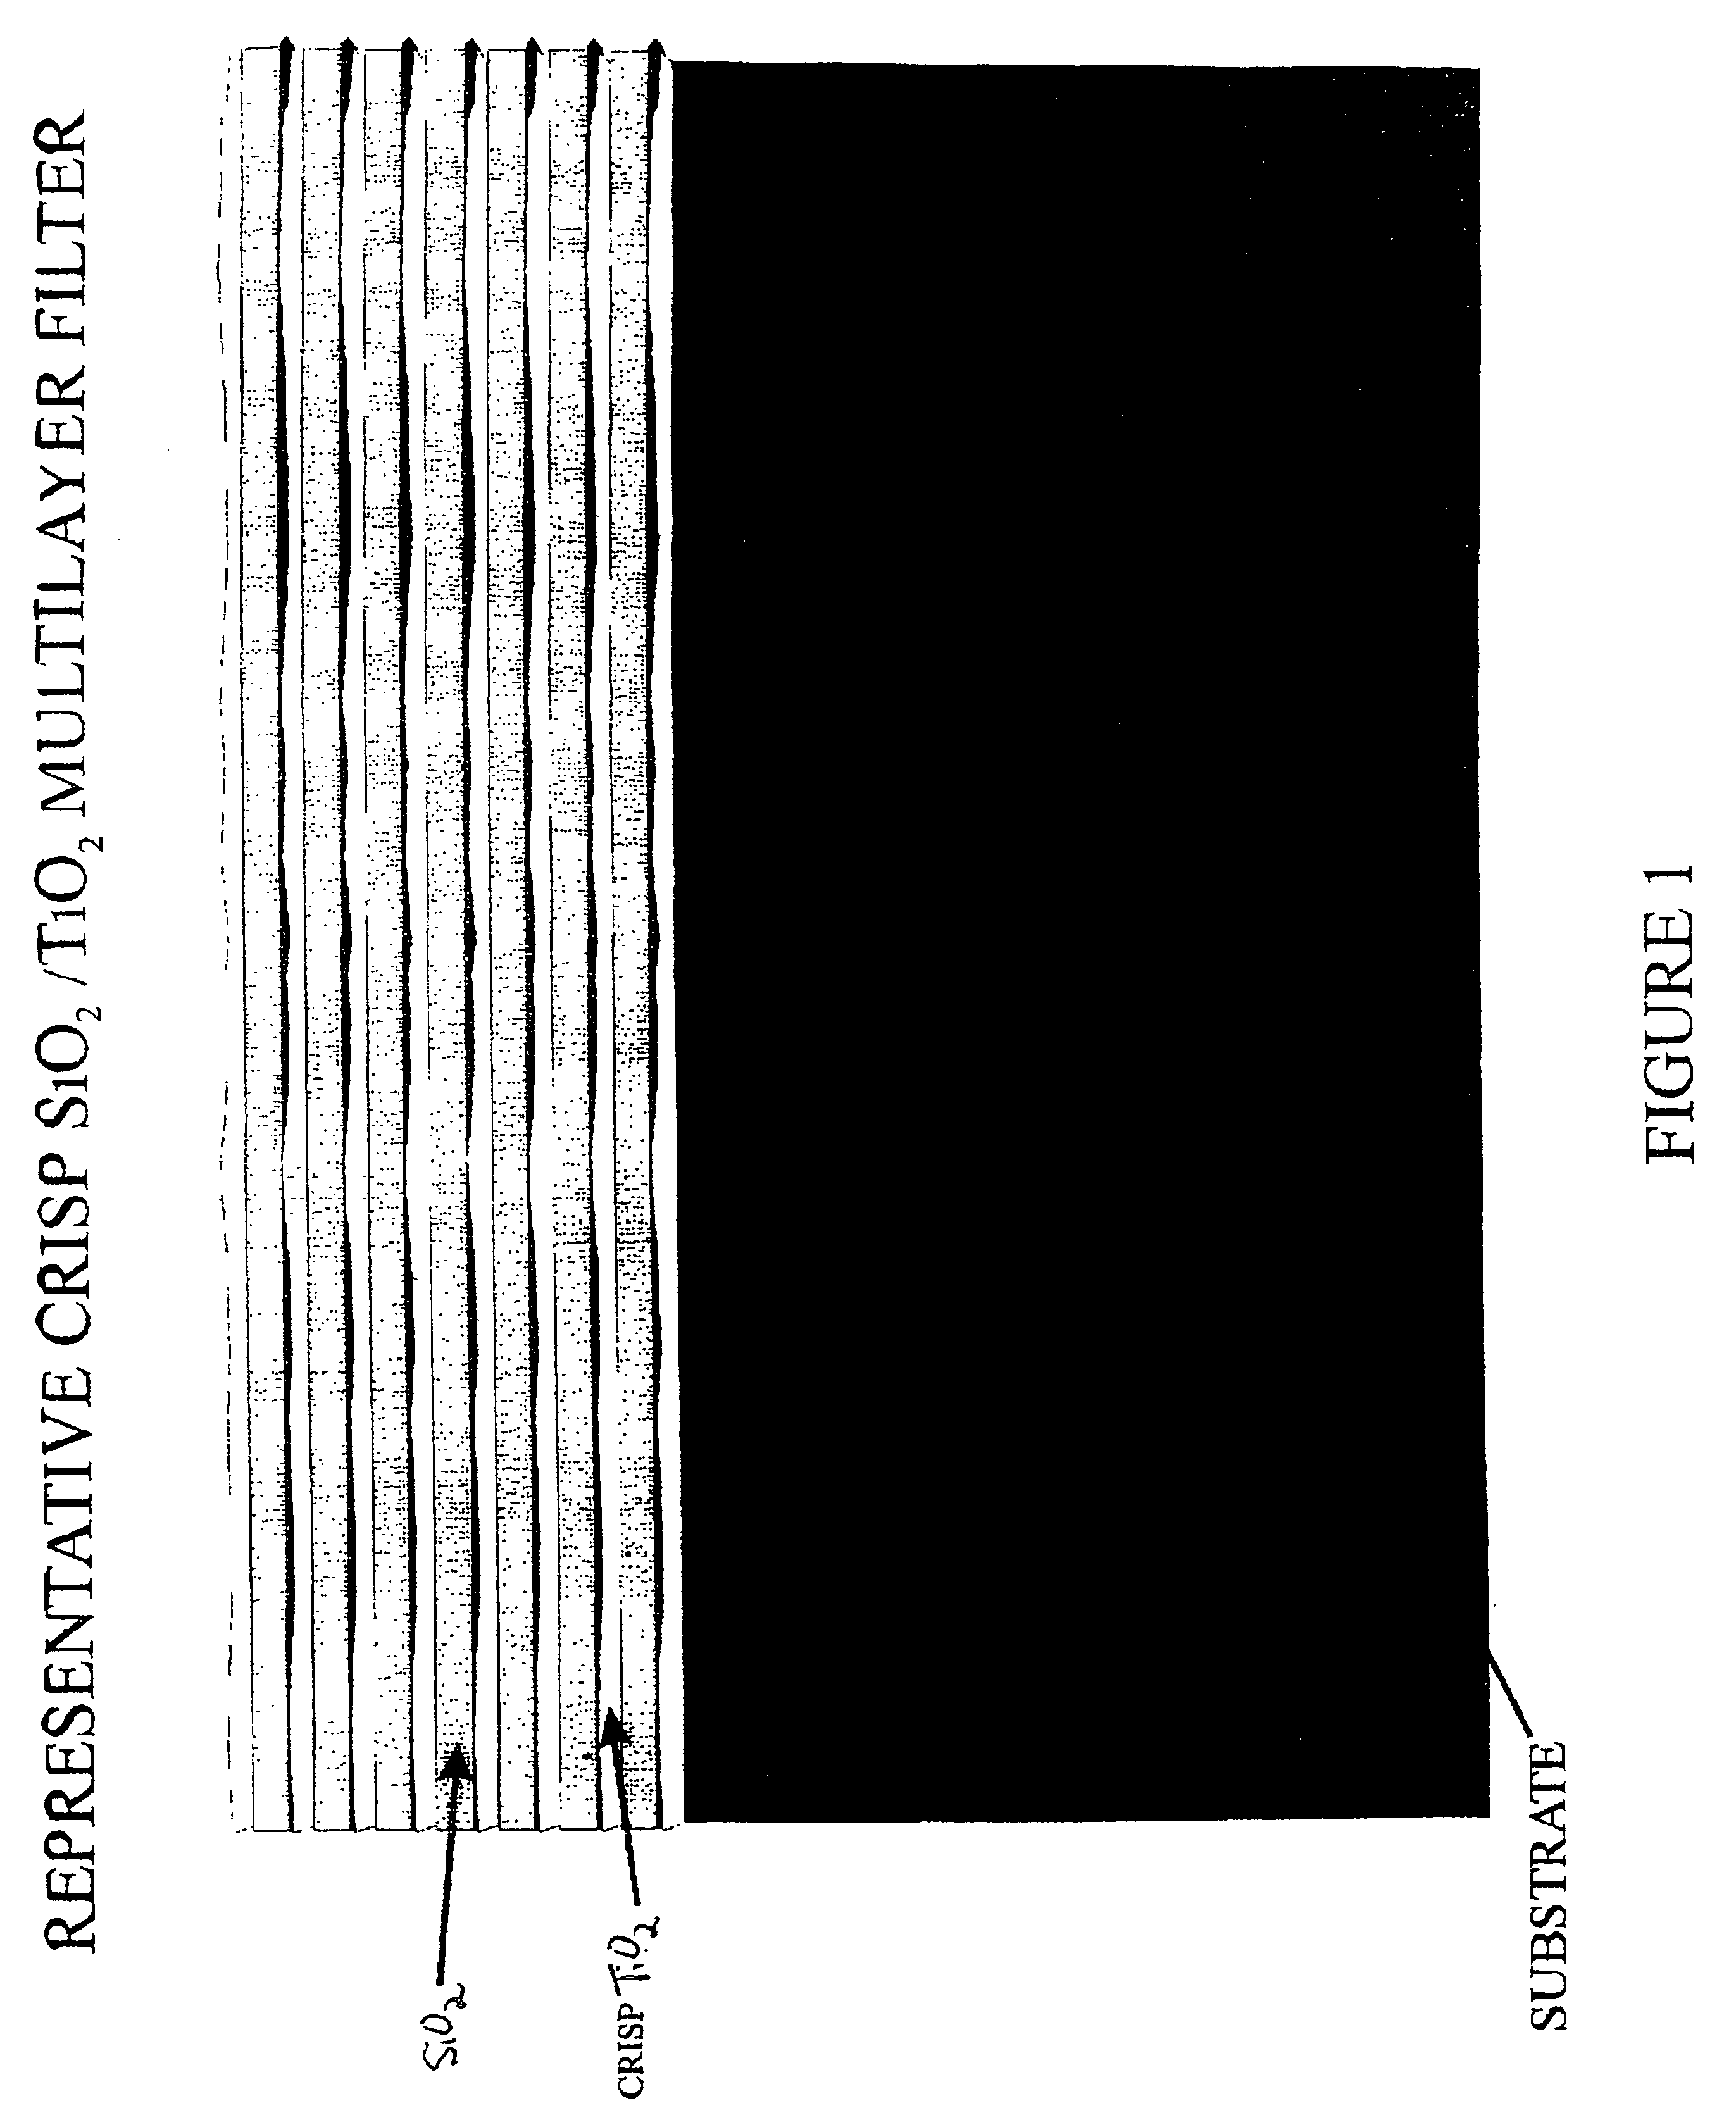 Method of constructing optical filters by atomic layer control for next generation dense wavelength division multiplexer